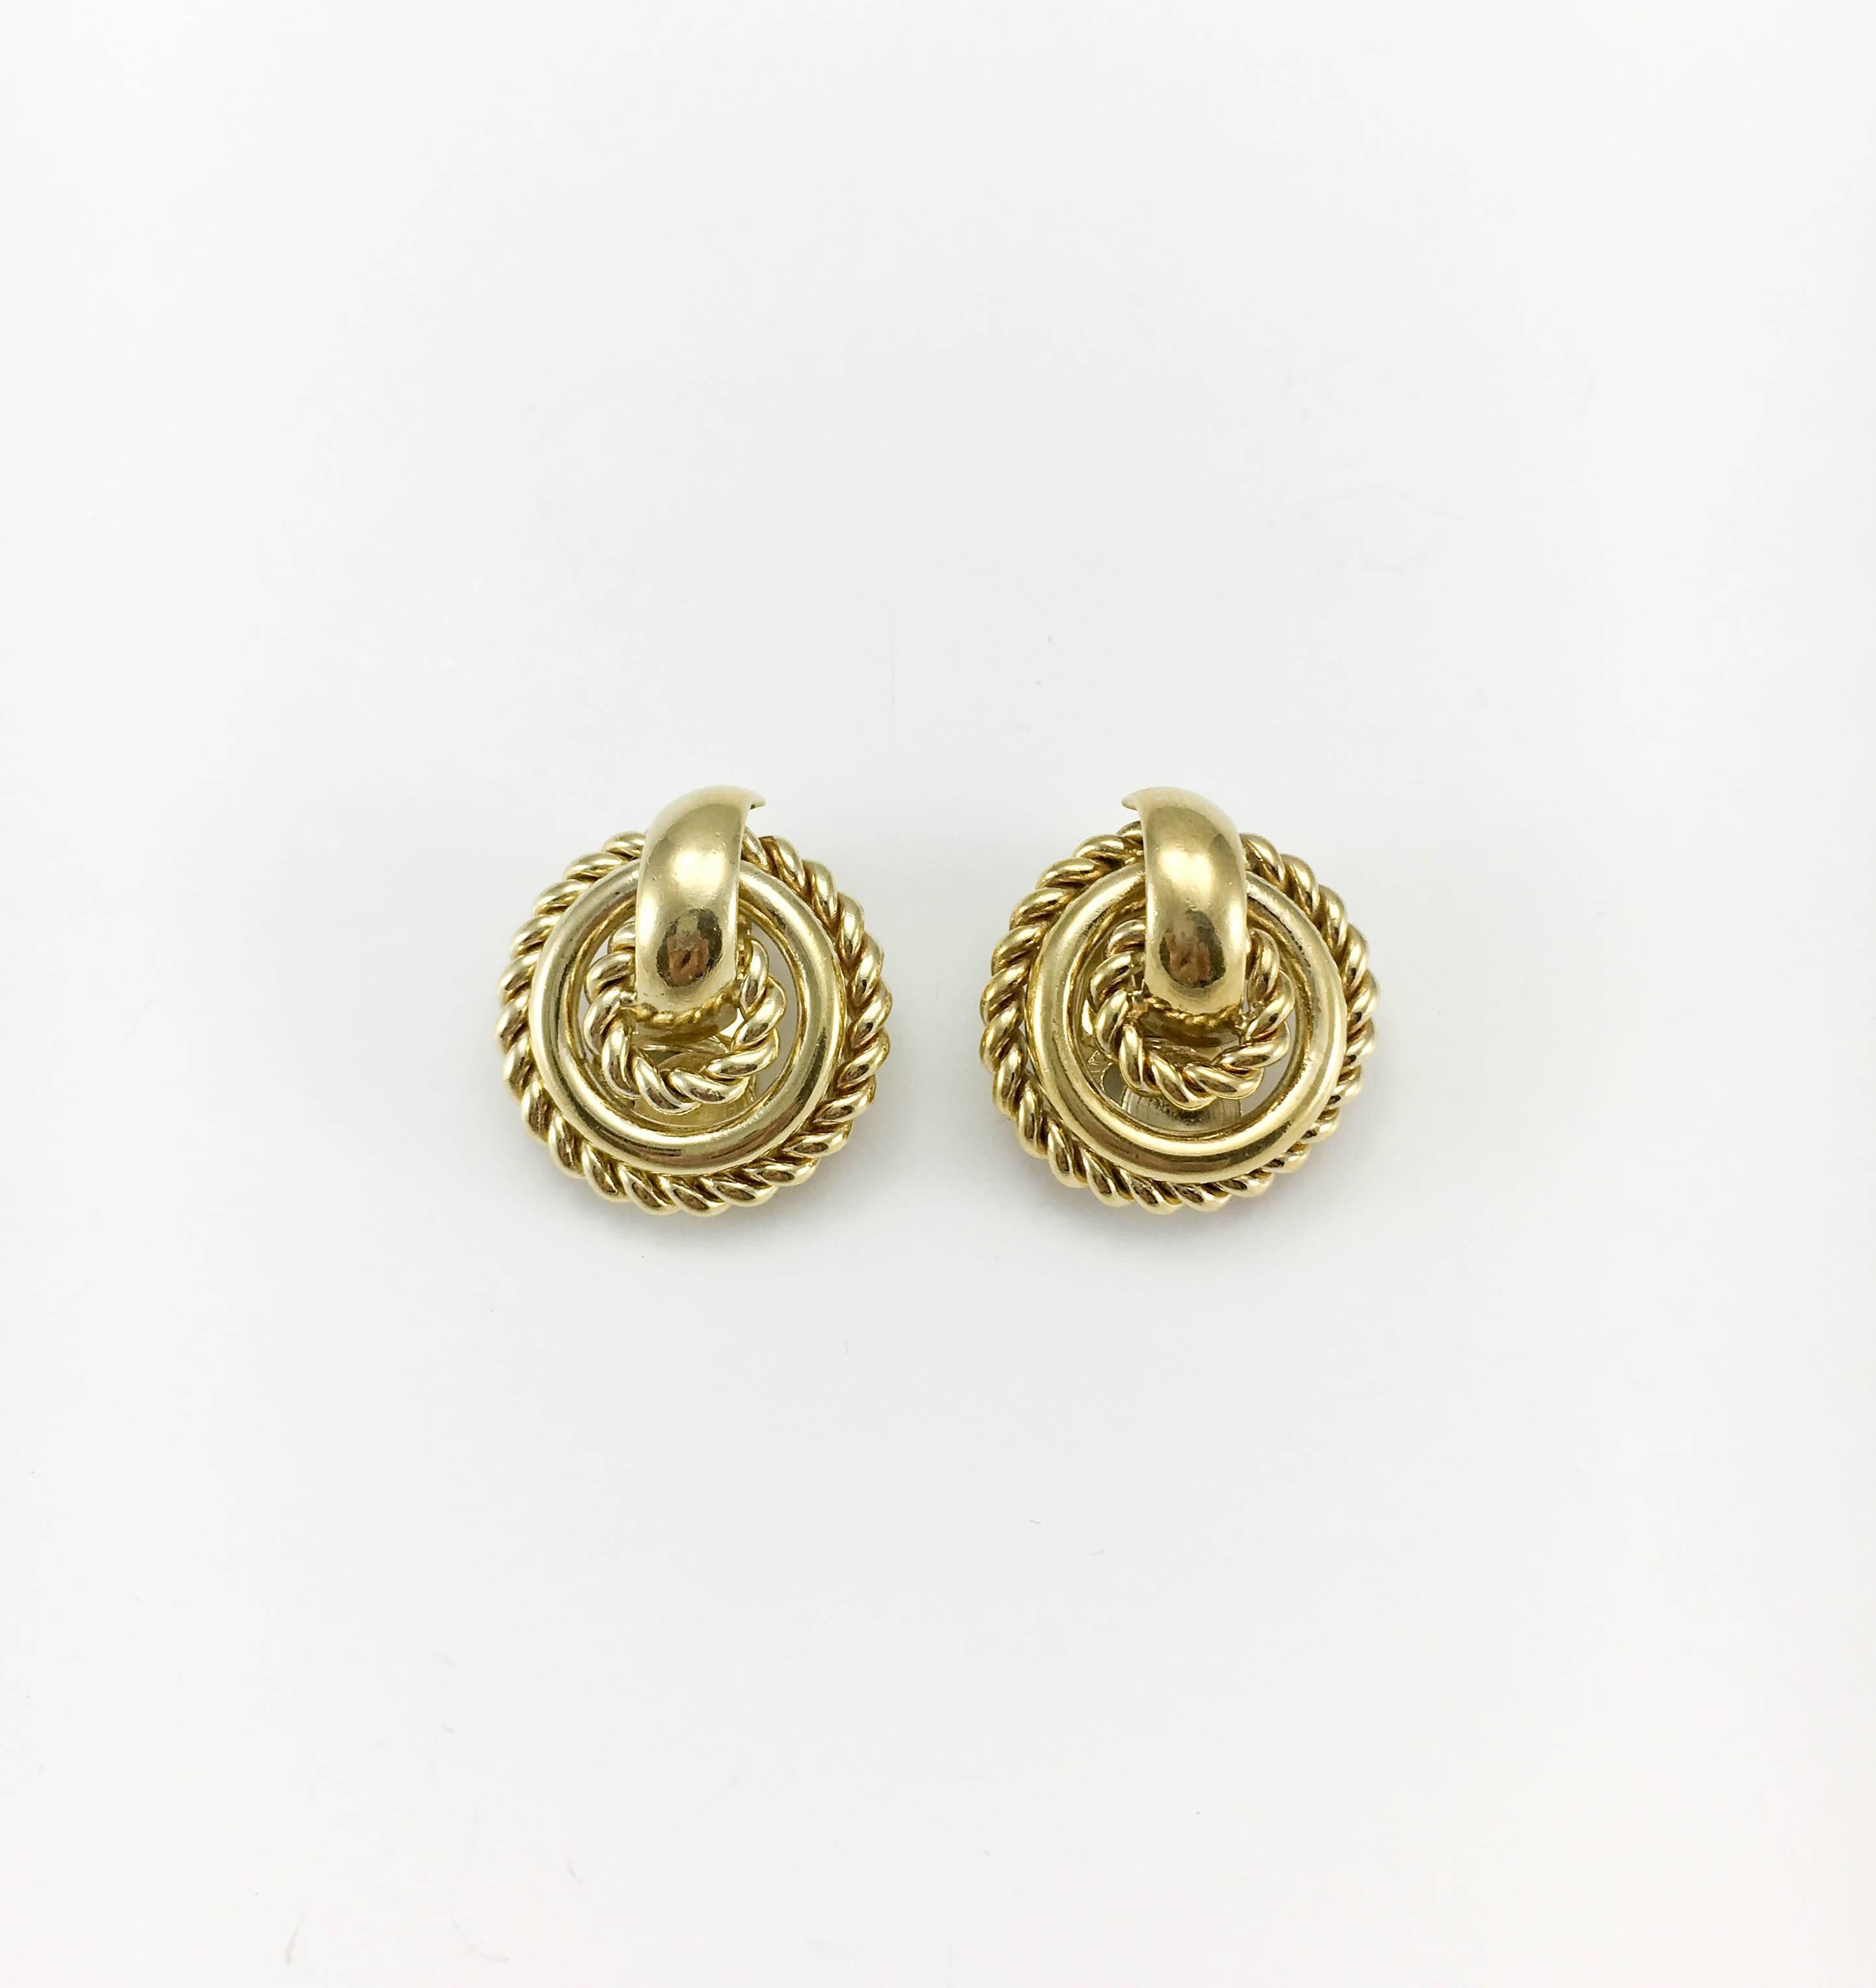 Stylish Vintage Christian Dior Clip-On Earrings. Made in Germany, they date back from the 1980’s. In gilt metal, the round design feature three rings, with the outer and inner ones resembling ropes. Ch Dior signed on the back. These earrings are an